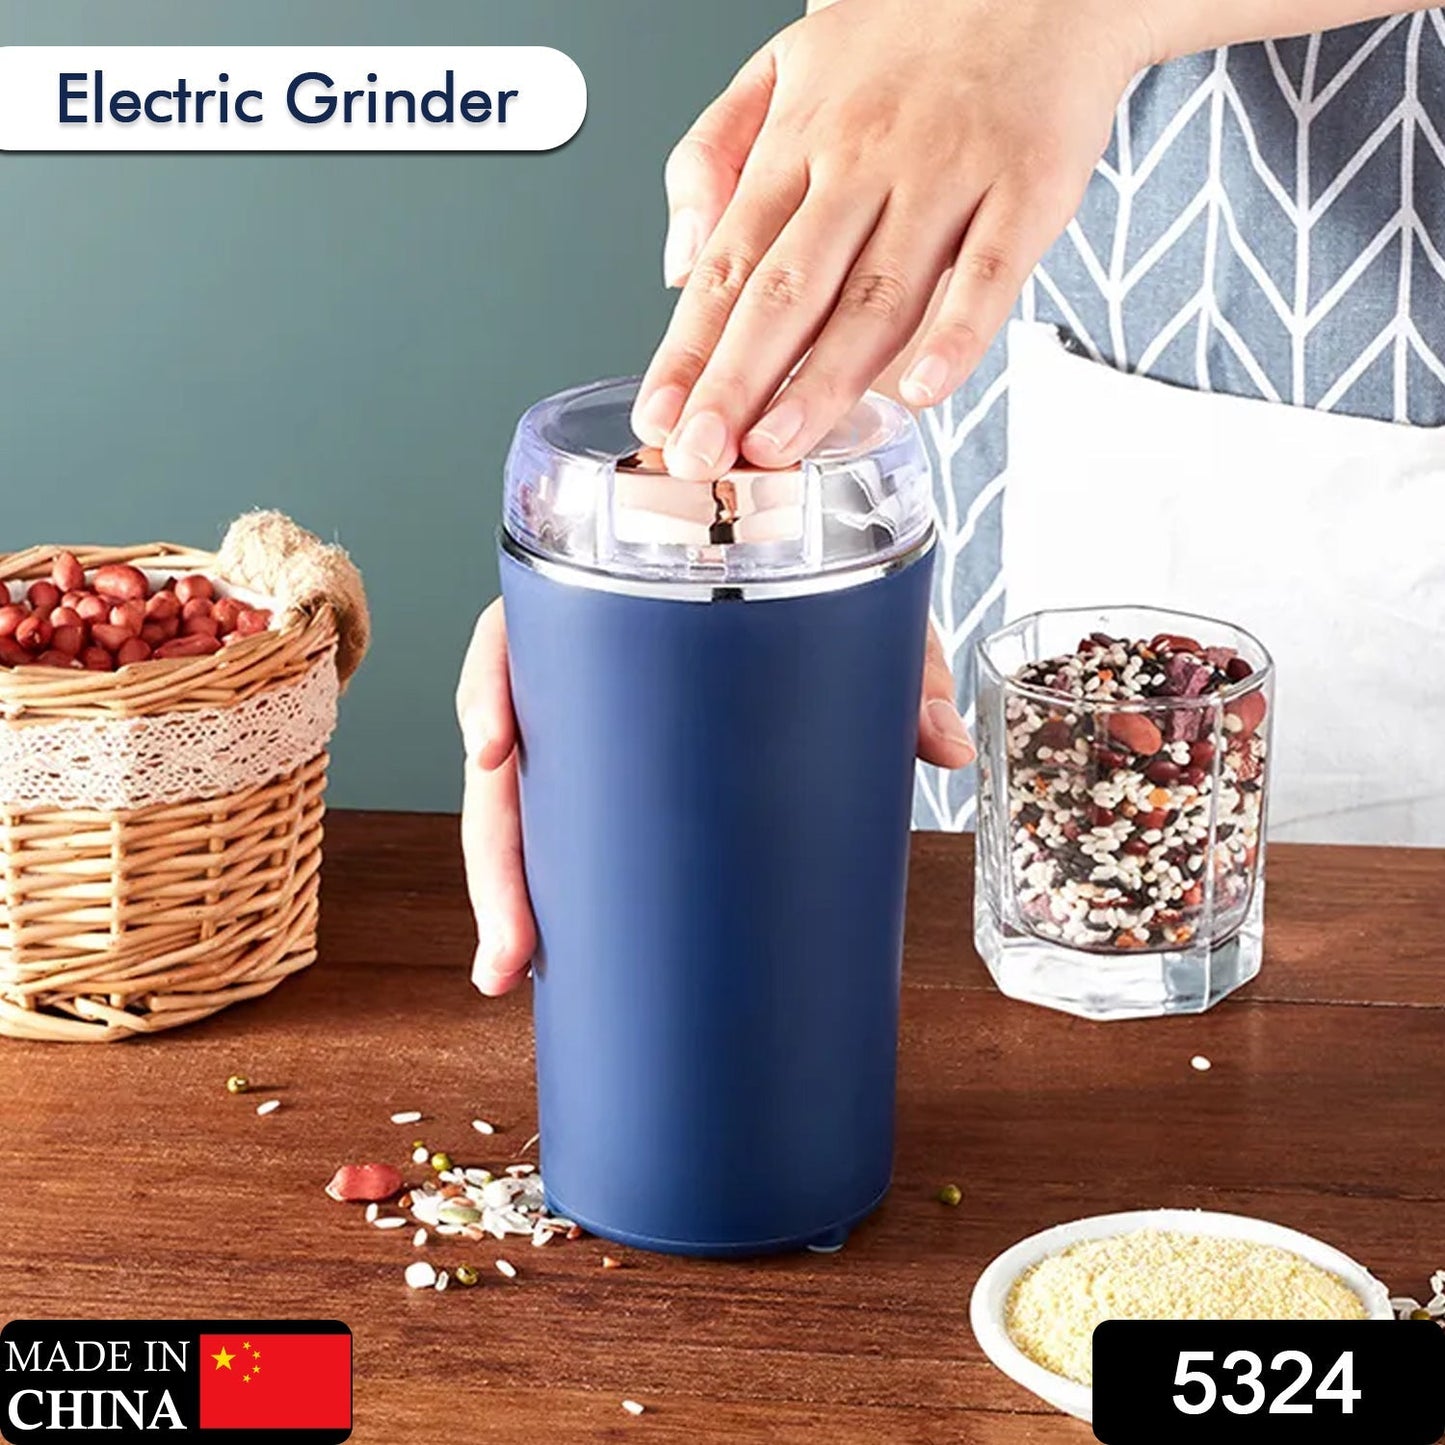 Mini Mixer, Small Blander, Power full Mini Grinder, Electric Coffee Bean Grinder Grinder Machine Portable Grinder for Home and Office.